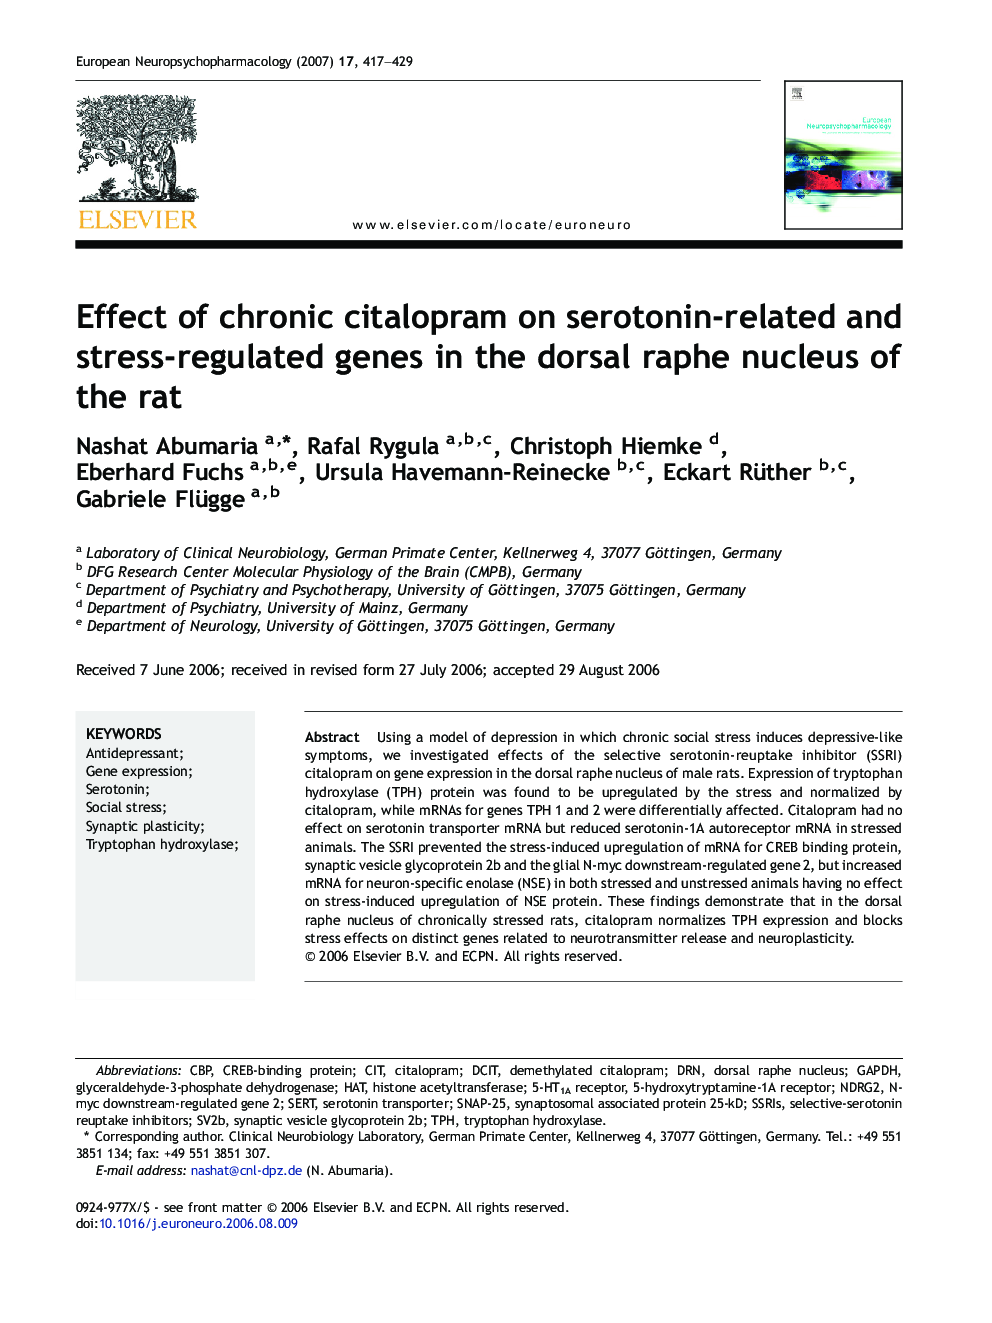 Effect of chronic citalopram on serotonin-related and stress-regulated genes in the dorsal raphe nucleus of the rat